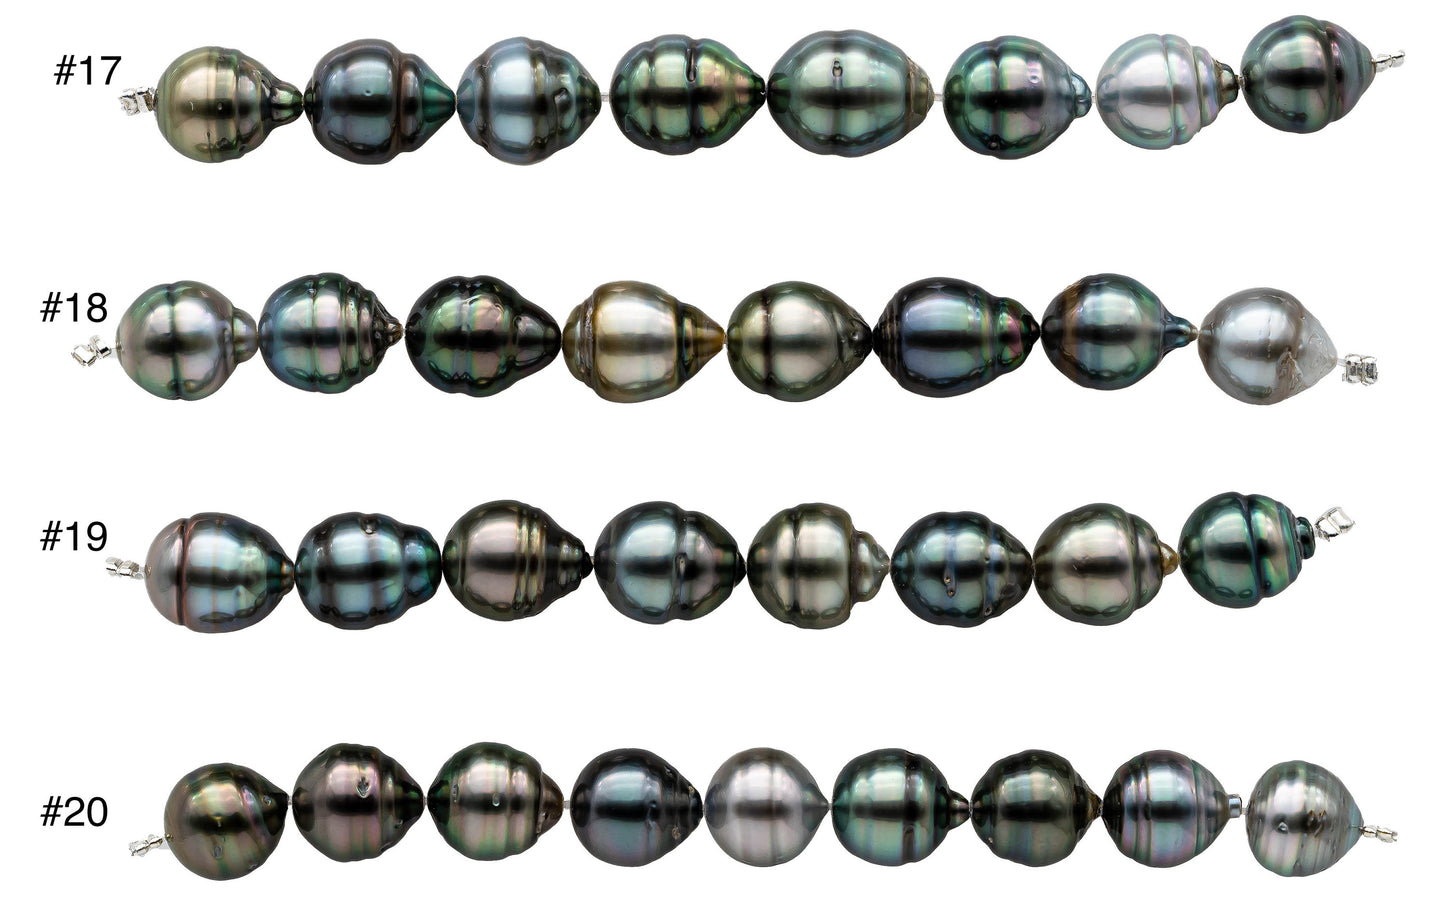 Rainbow Tahitian Pearl Teardrops or Near Round with Beautiful Luster and Blemishes, Natural Multi-Color  Strand 4 Inch, 10-11mm, SKU#1103TH